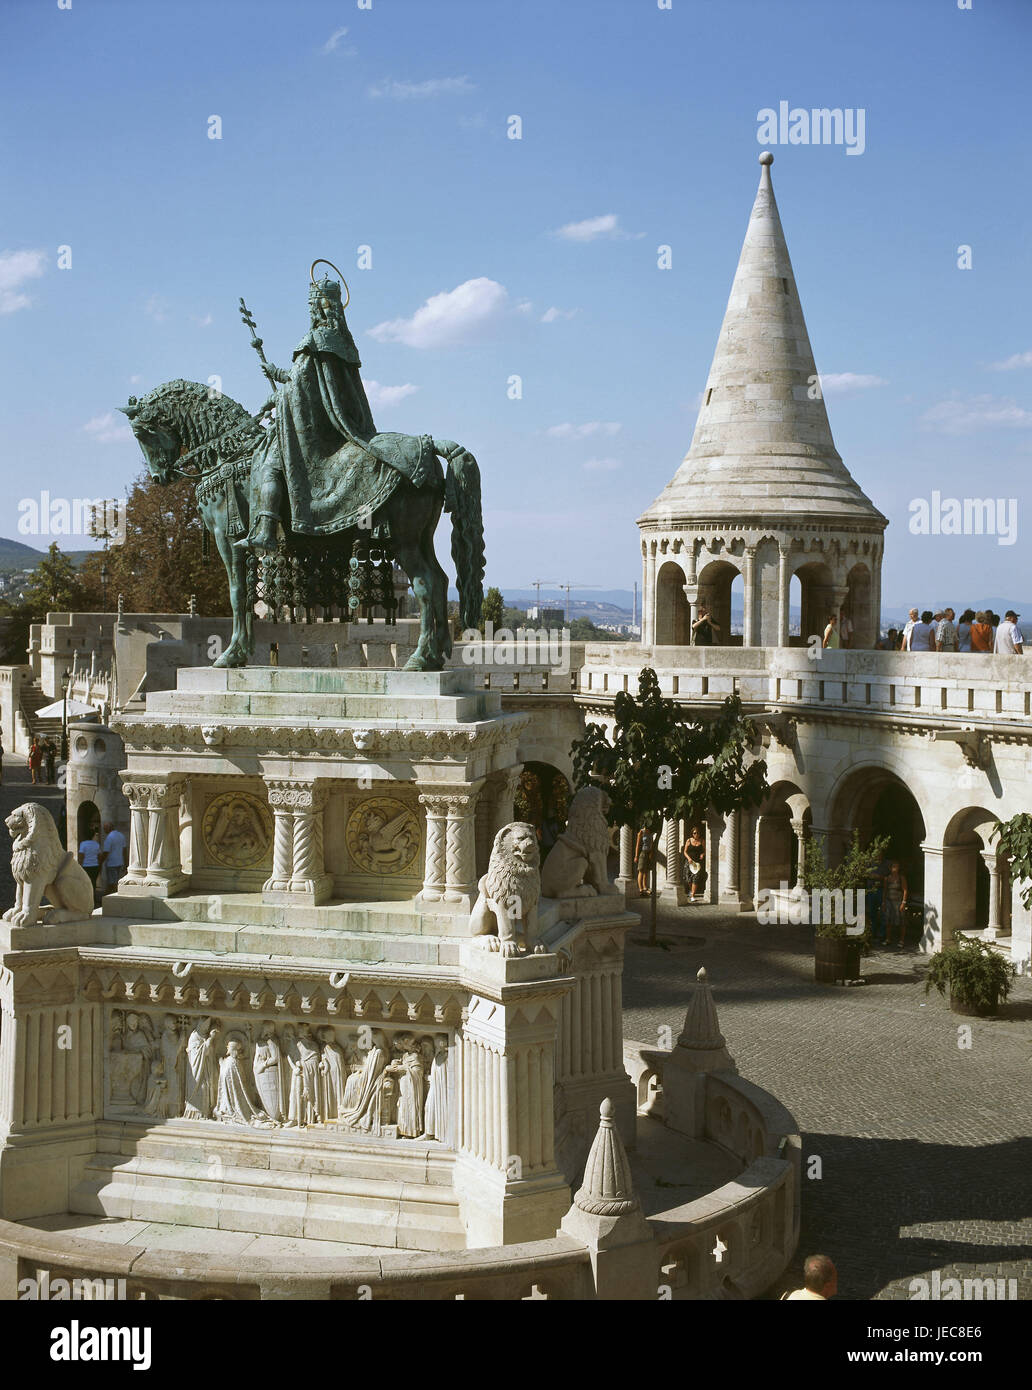 Hungary, Budapest, fishing bastion, bleed monument king Stephan I, capital, castle mountain, castle, fortification, Halaszbastya, structure, architecture, architecture, landmark, place of interest, destination, tourism, UNESCO-world cultural heritage, Stock Photo